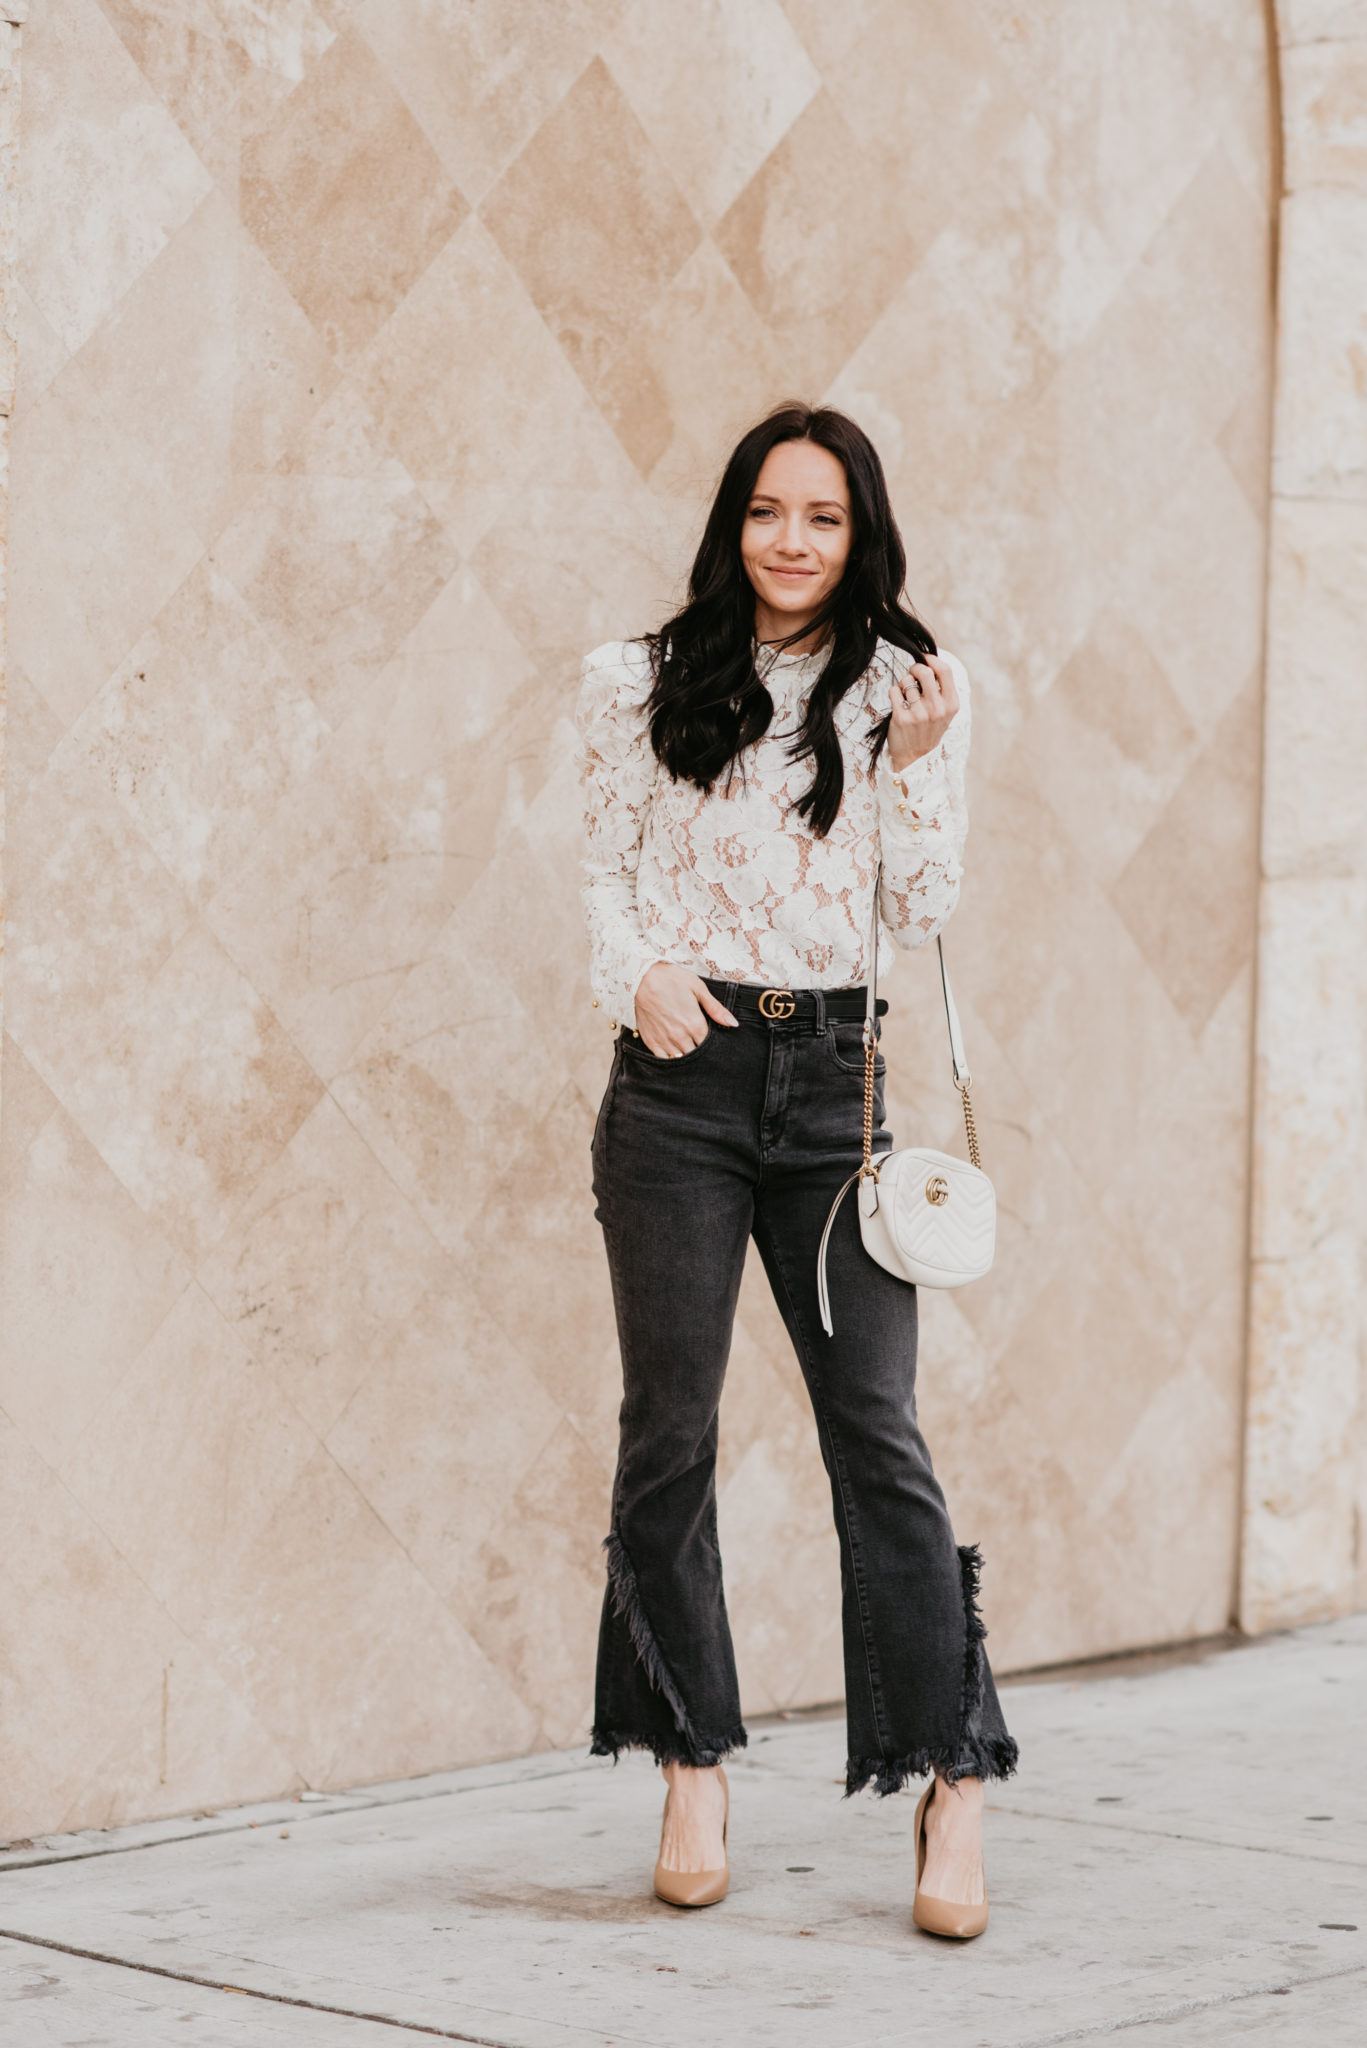 Cute white lace top styled for Spring for top US fashion blog, Outfits & Outings: image of a woman wearing a WAYF white lace top, DL1961 cropped flared jeans, Gucci double g leather belt, Gucci marmot bag and Charles David toe pumps